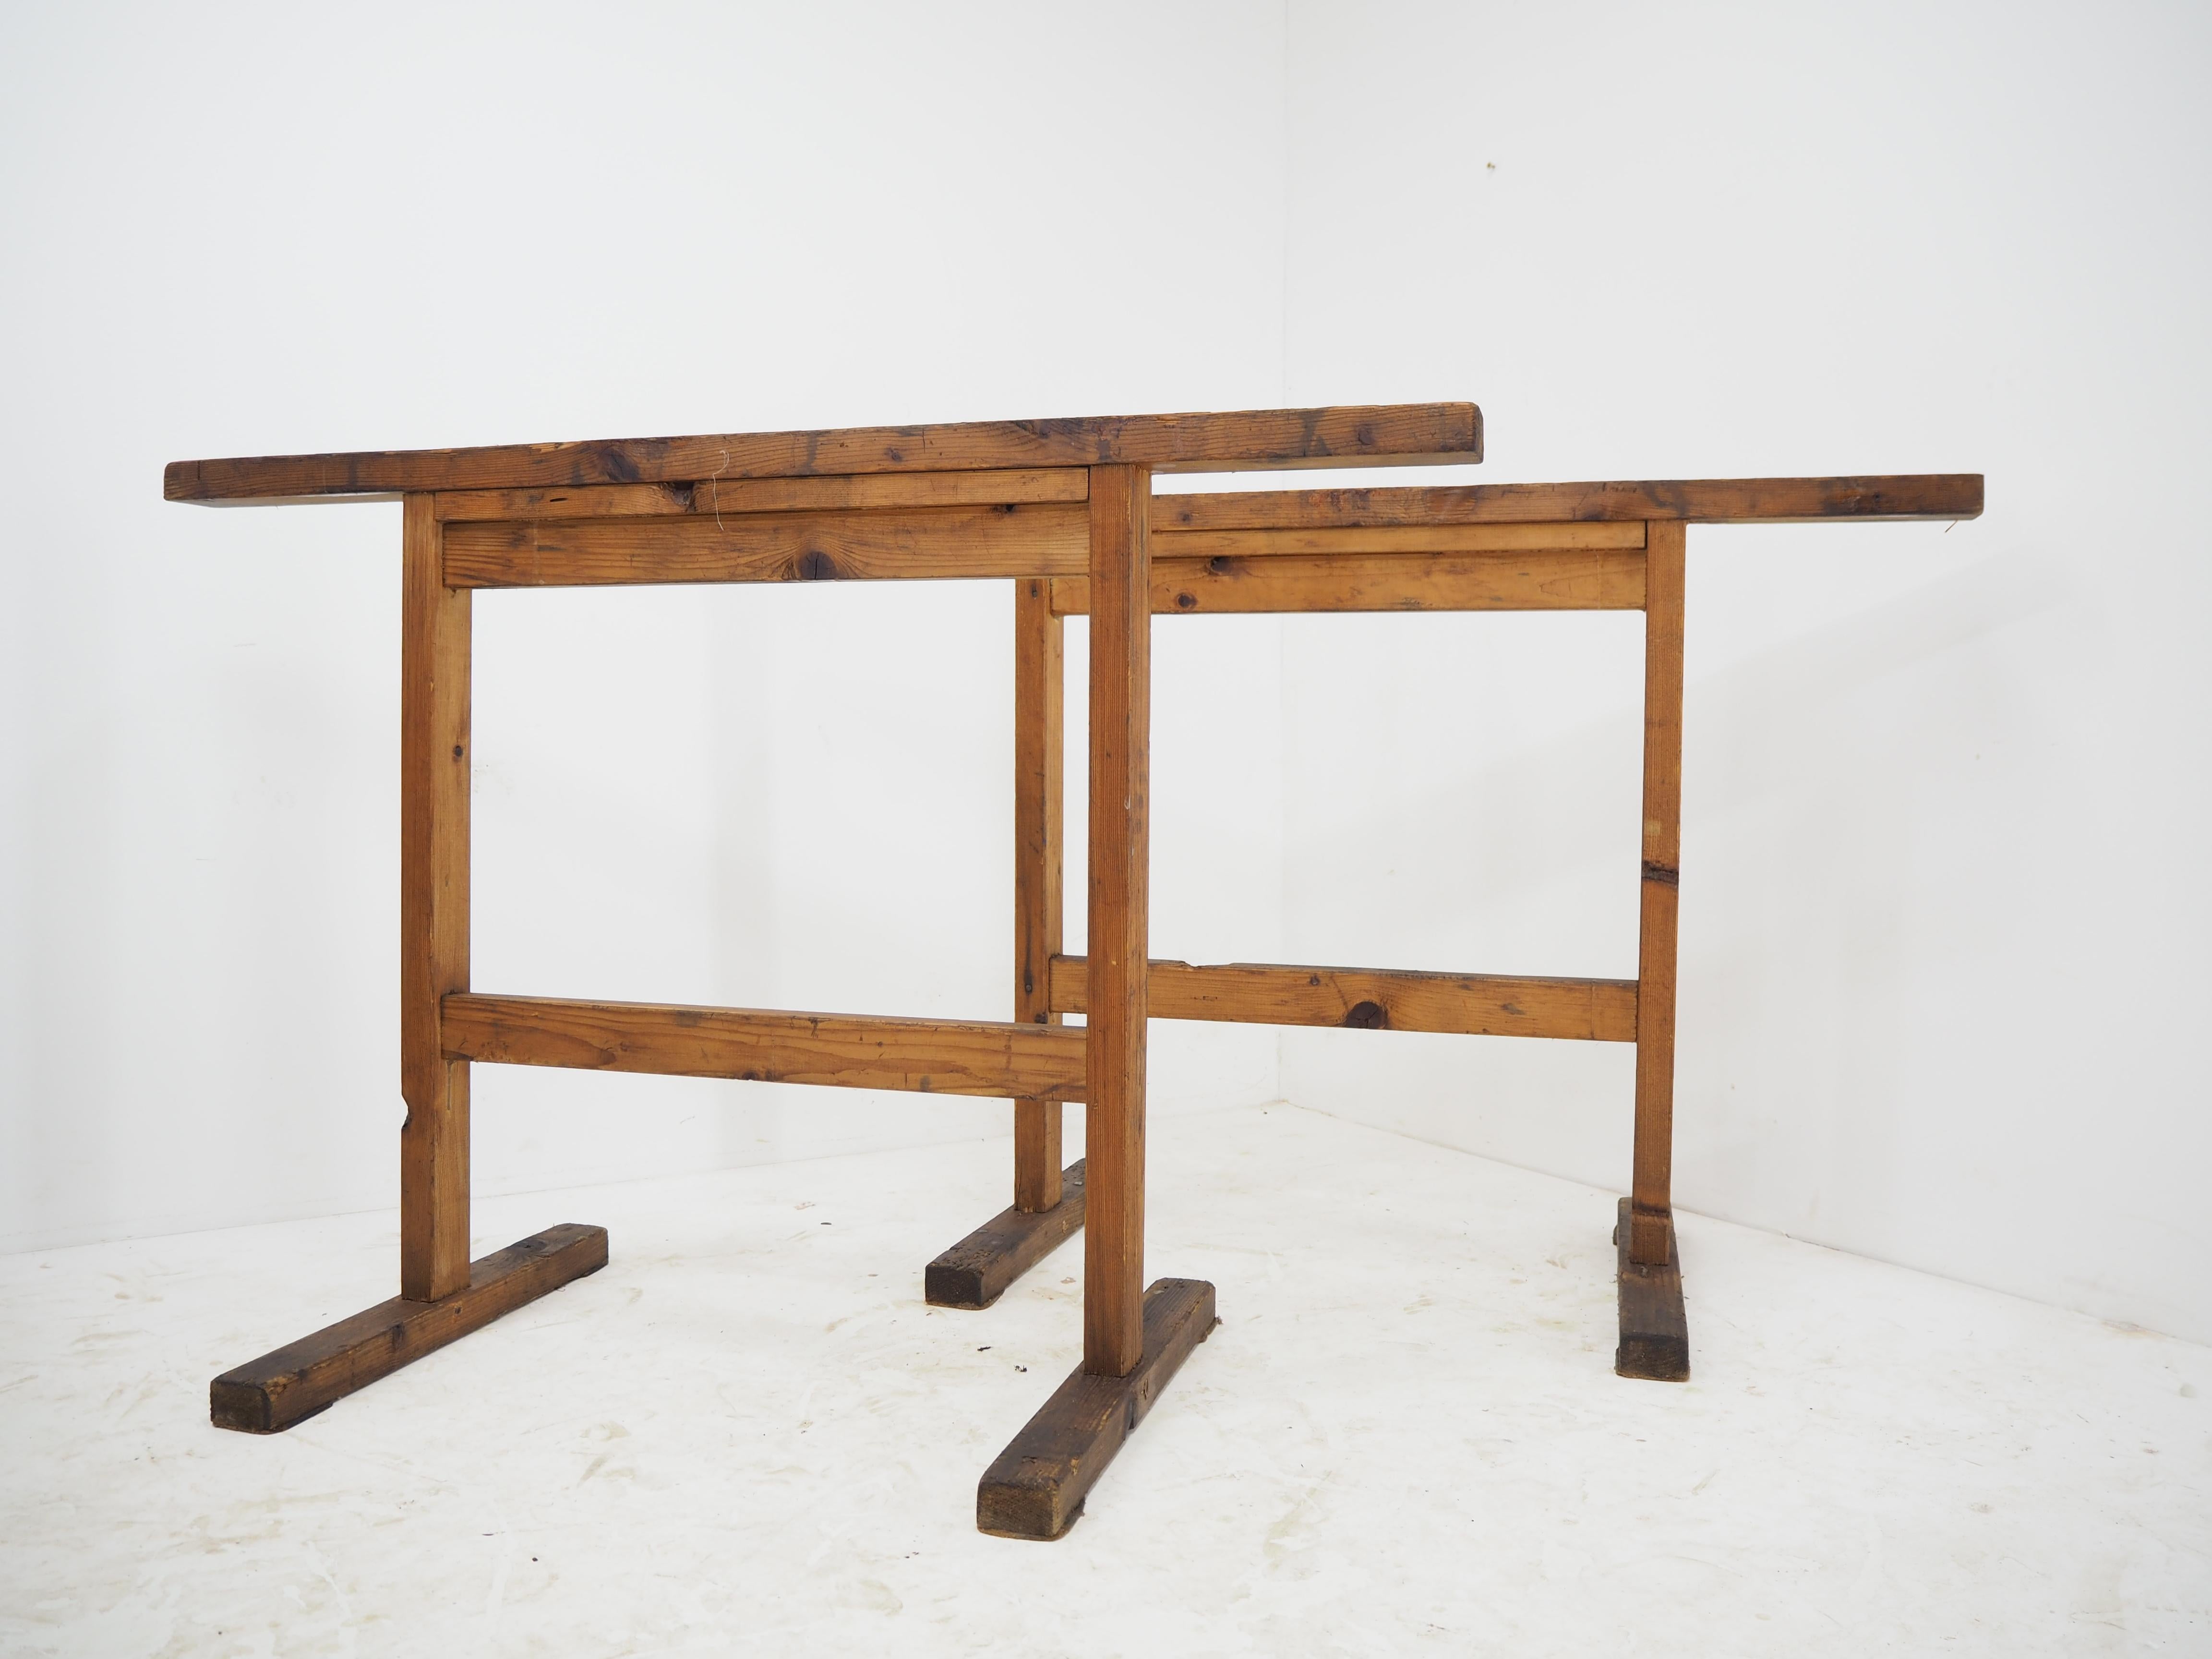 Pair of Industrial Wood Trestle Table Bases, Early 20th Century For Sale 2